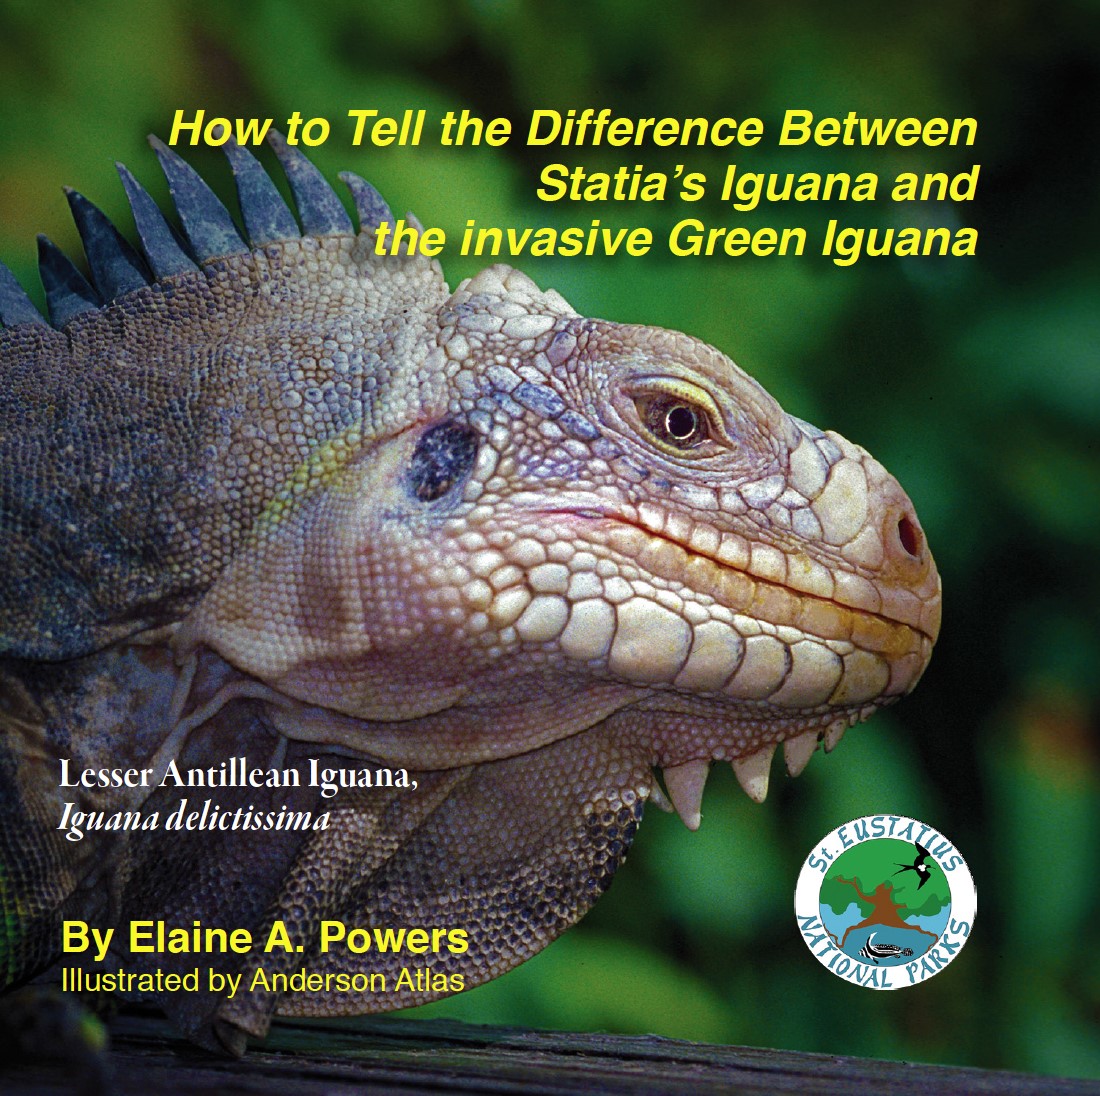 cover of booklet showing iguana image